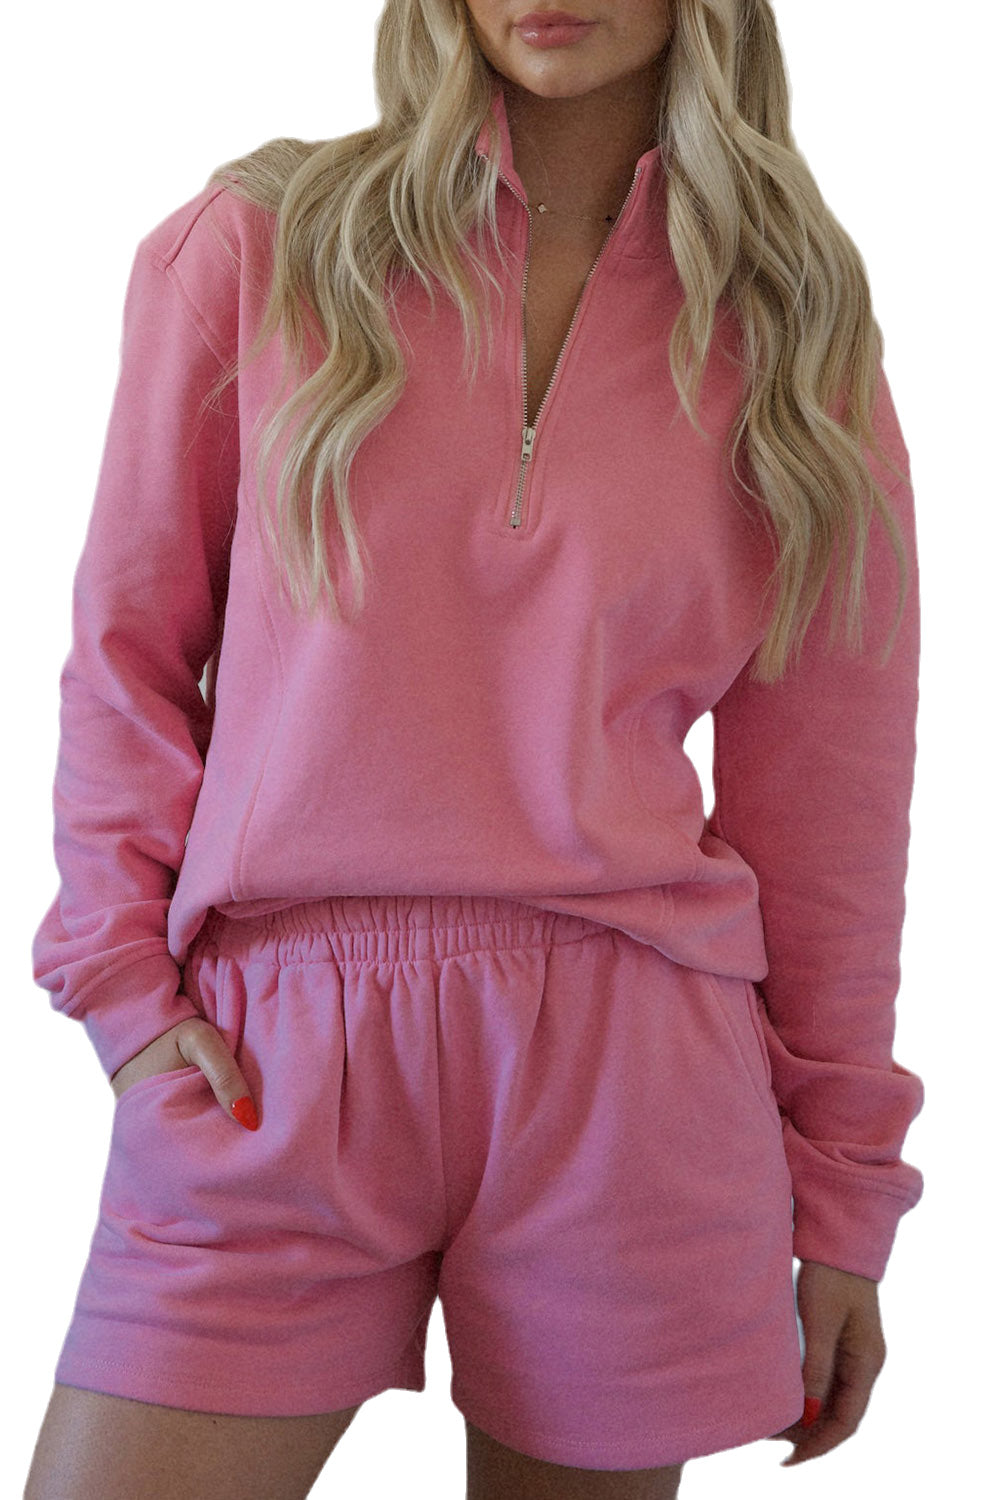 Bonbon Quarter Zip Long Sleeve Top and Shorts Outfit